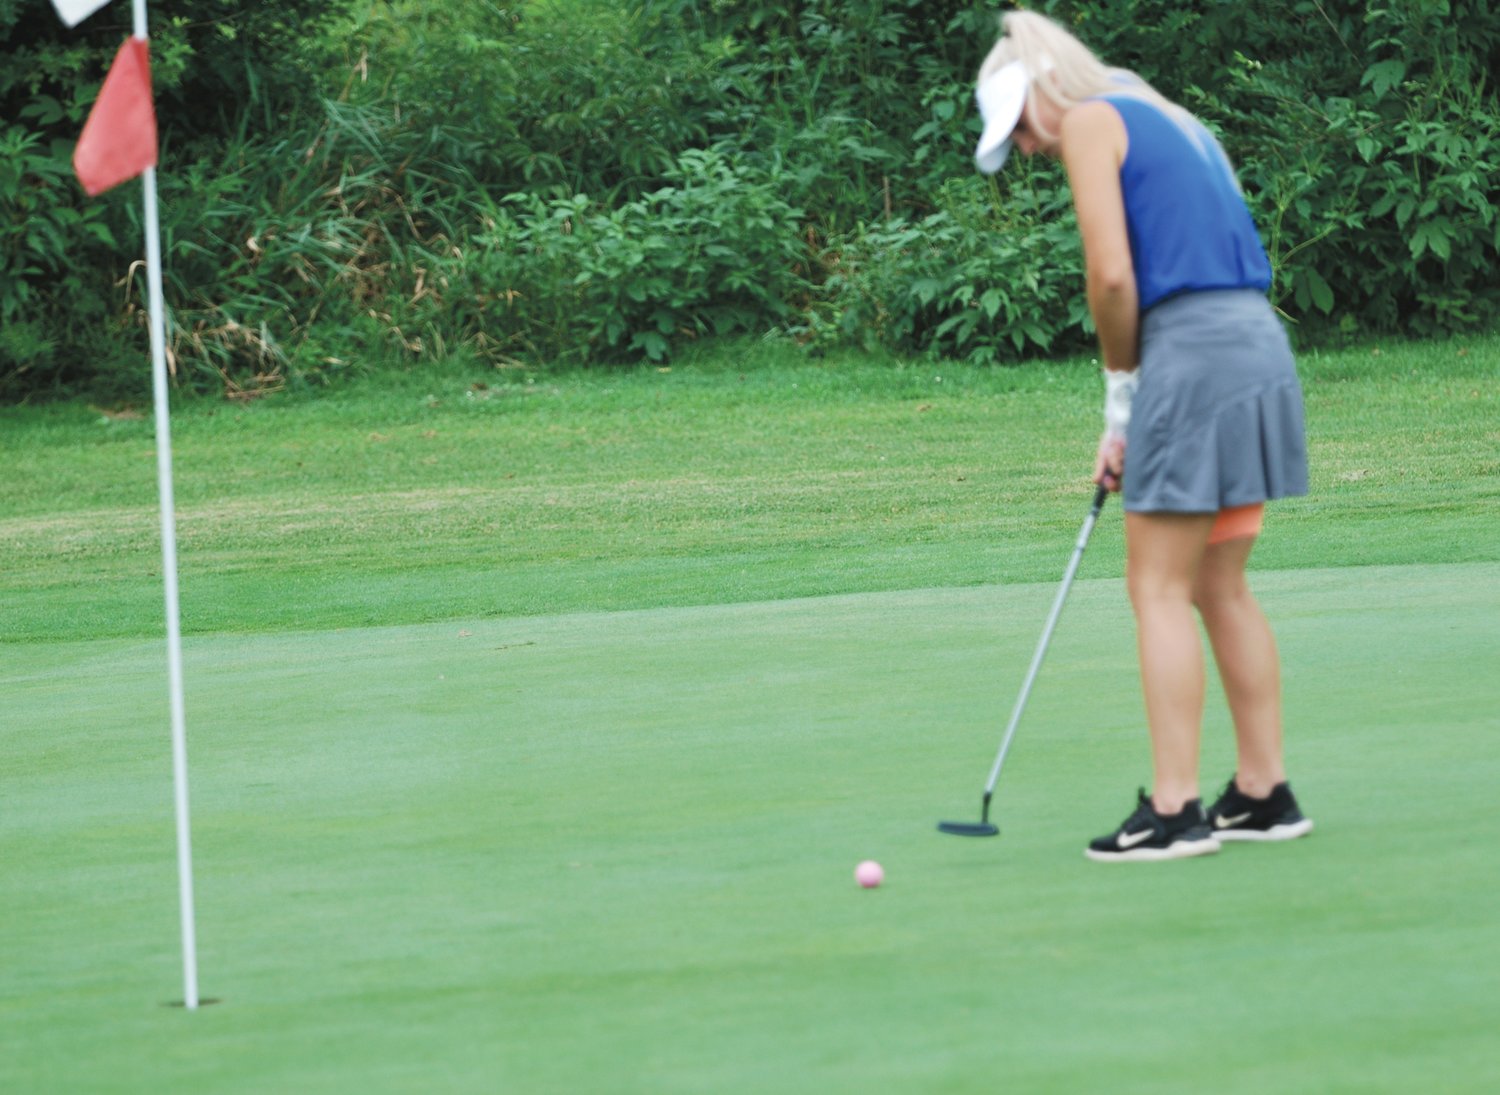 Crawfordsville's Sadie Walker putts during a match with University and Covington on Thursday evening at Crawfordsville Municipal Golf Course.